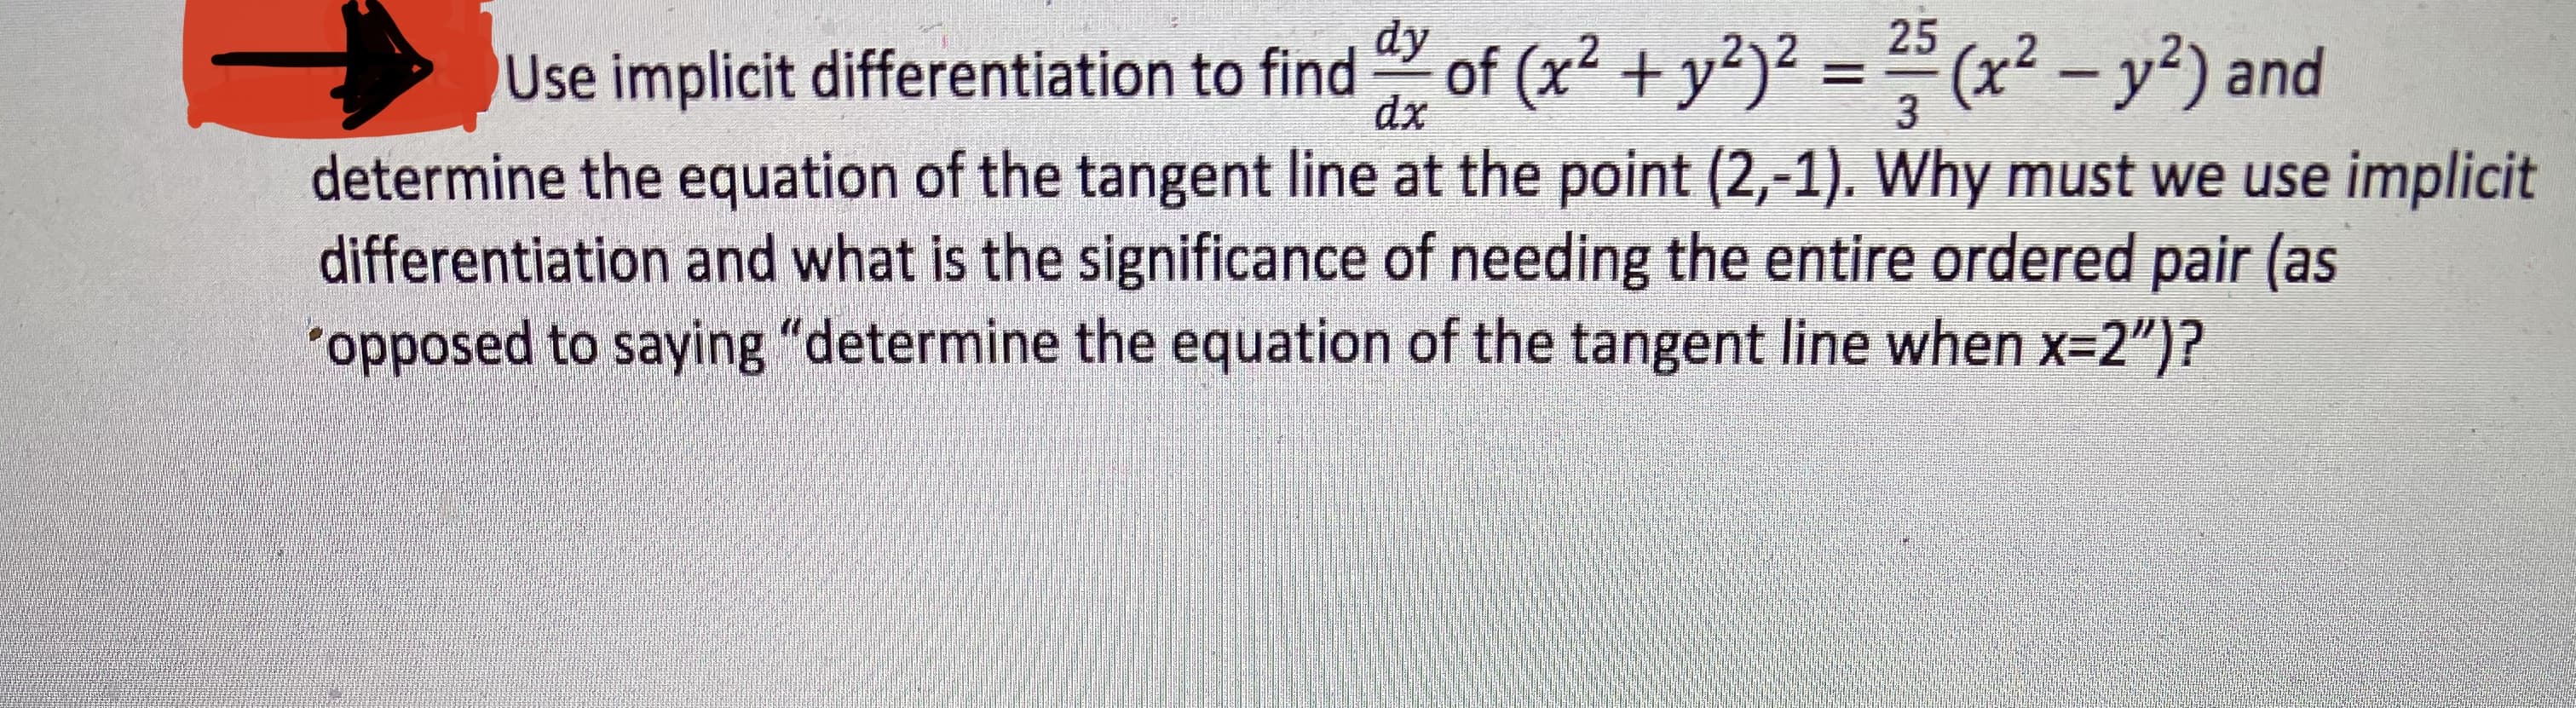 dy
25
Use implicit differentiation to find of (x² + y²)² = (x² – y²) and
%3D
dx
3
determine the equation of the tangent line at the point (2,-1). Why must we use implicit
differentiation and what is the significance of needing the entire ordered pair (as
"opposed to saying "determine the equation of the tangent line when x=2")?
